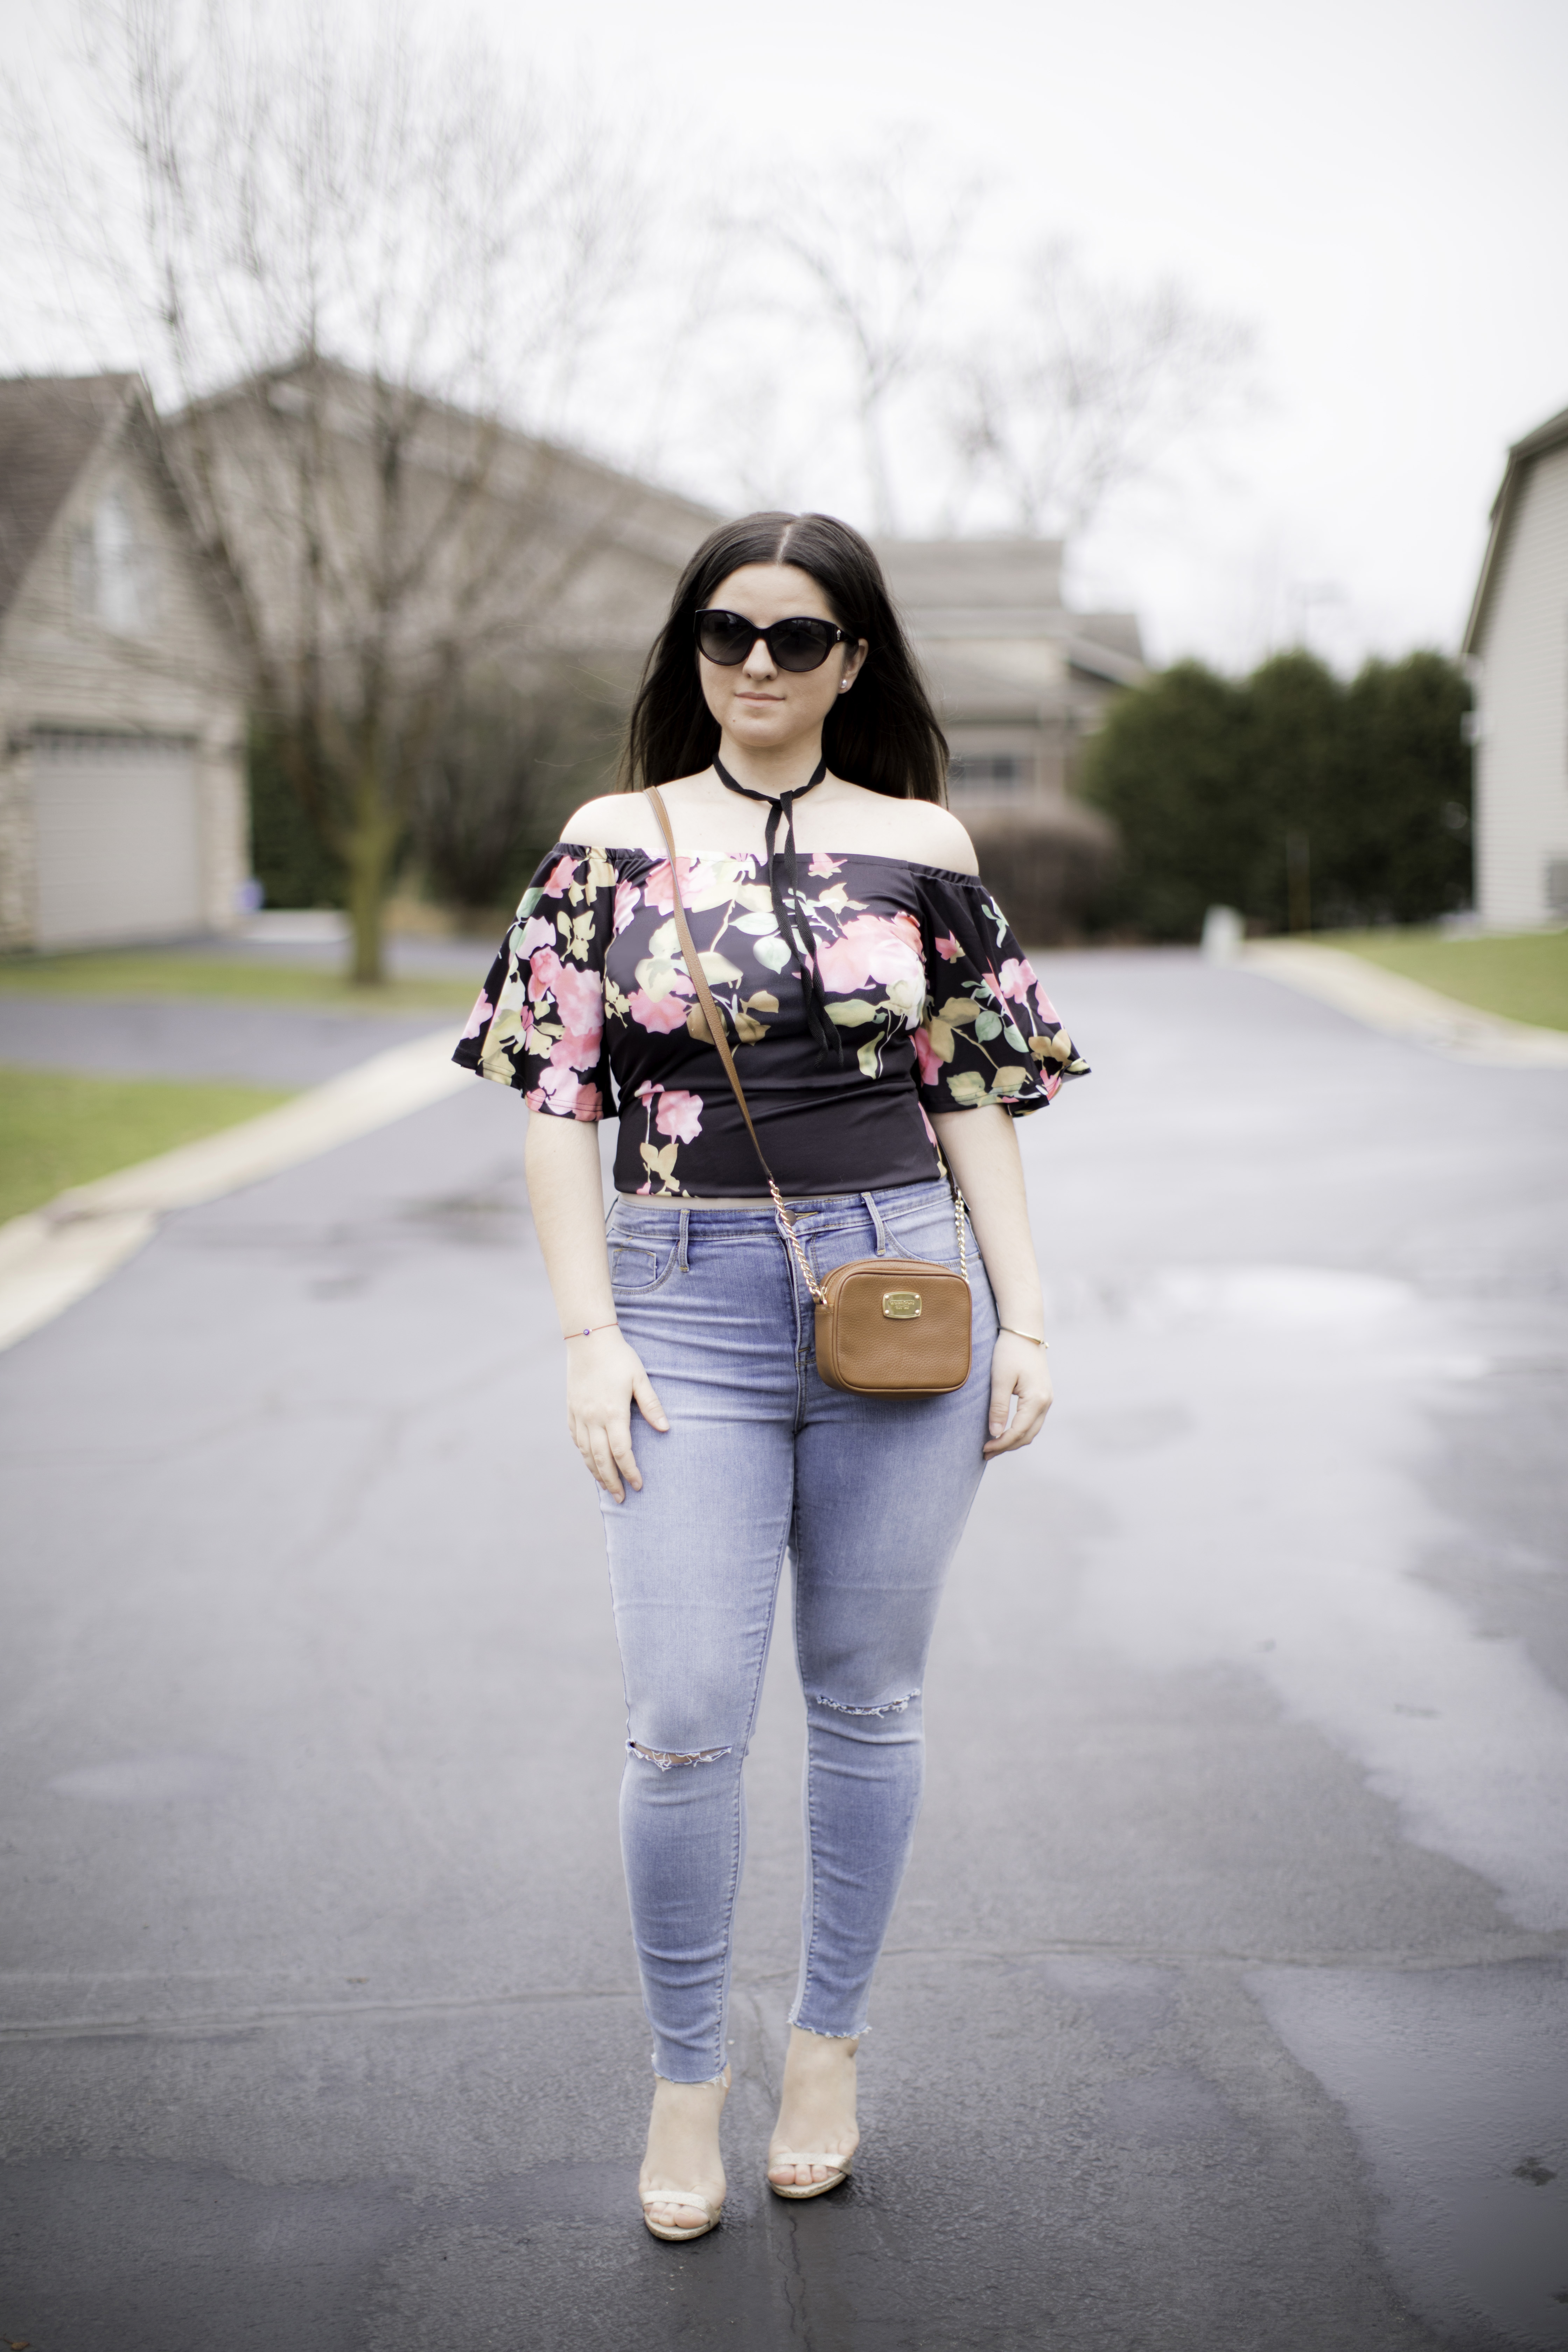 How to style an off the shoulder top for a date nigh, floral top, skinny high waist jeans, bailylamb, chicagoblogger, rockfordblogger